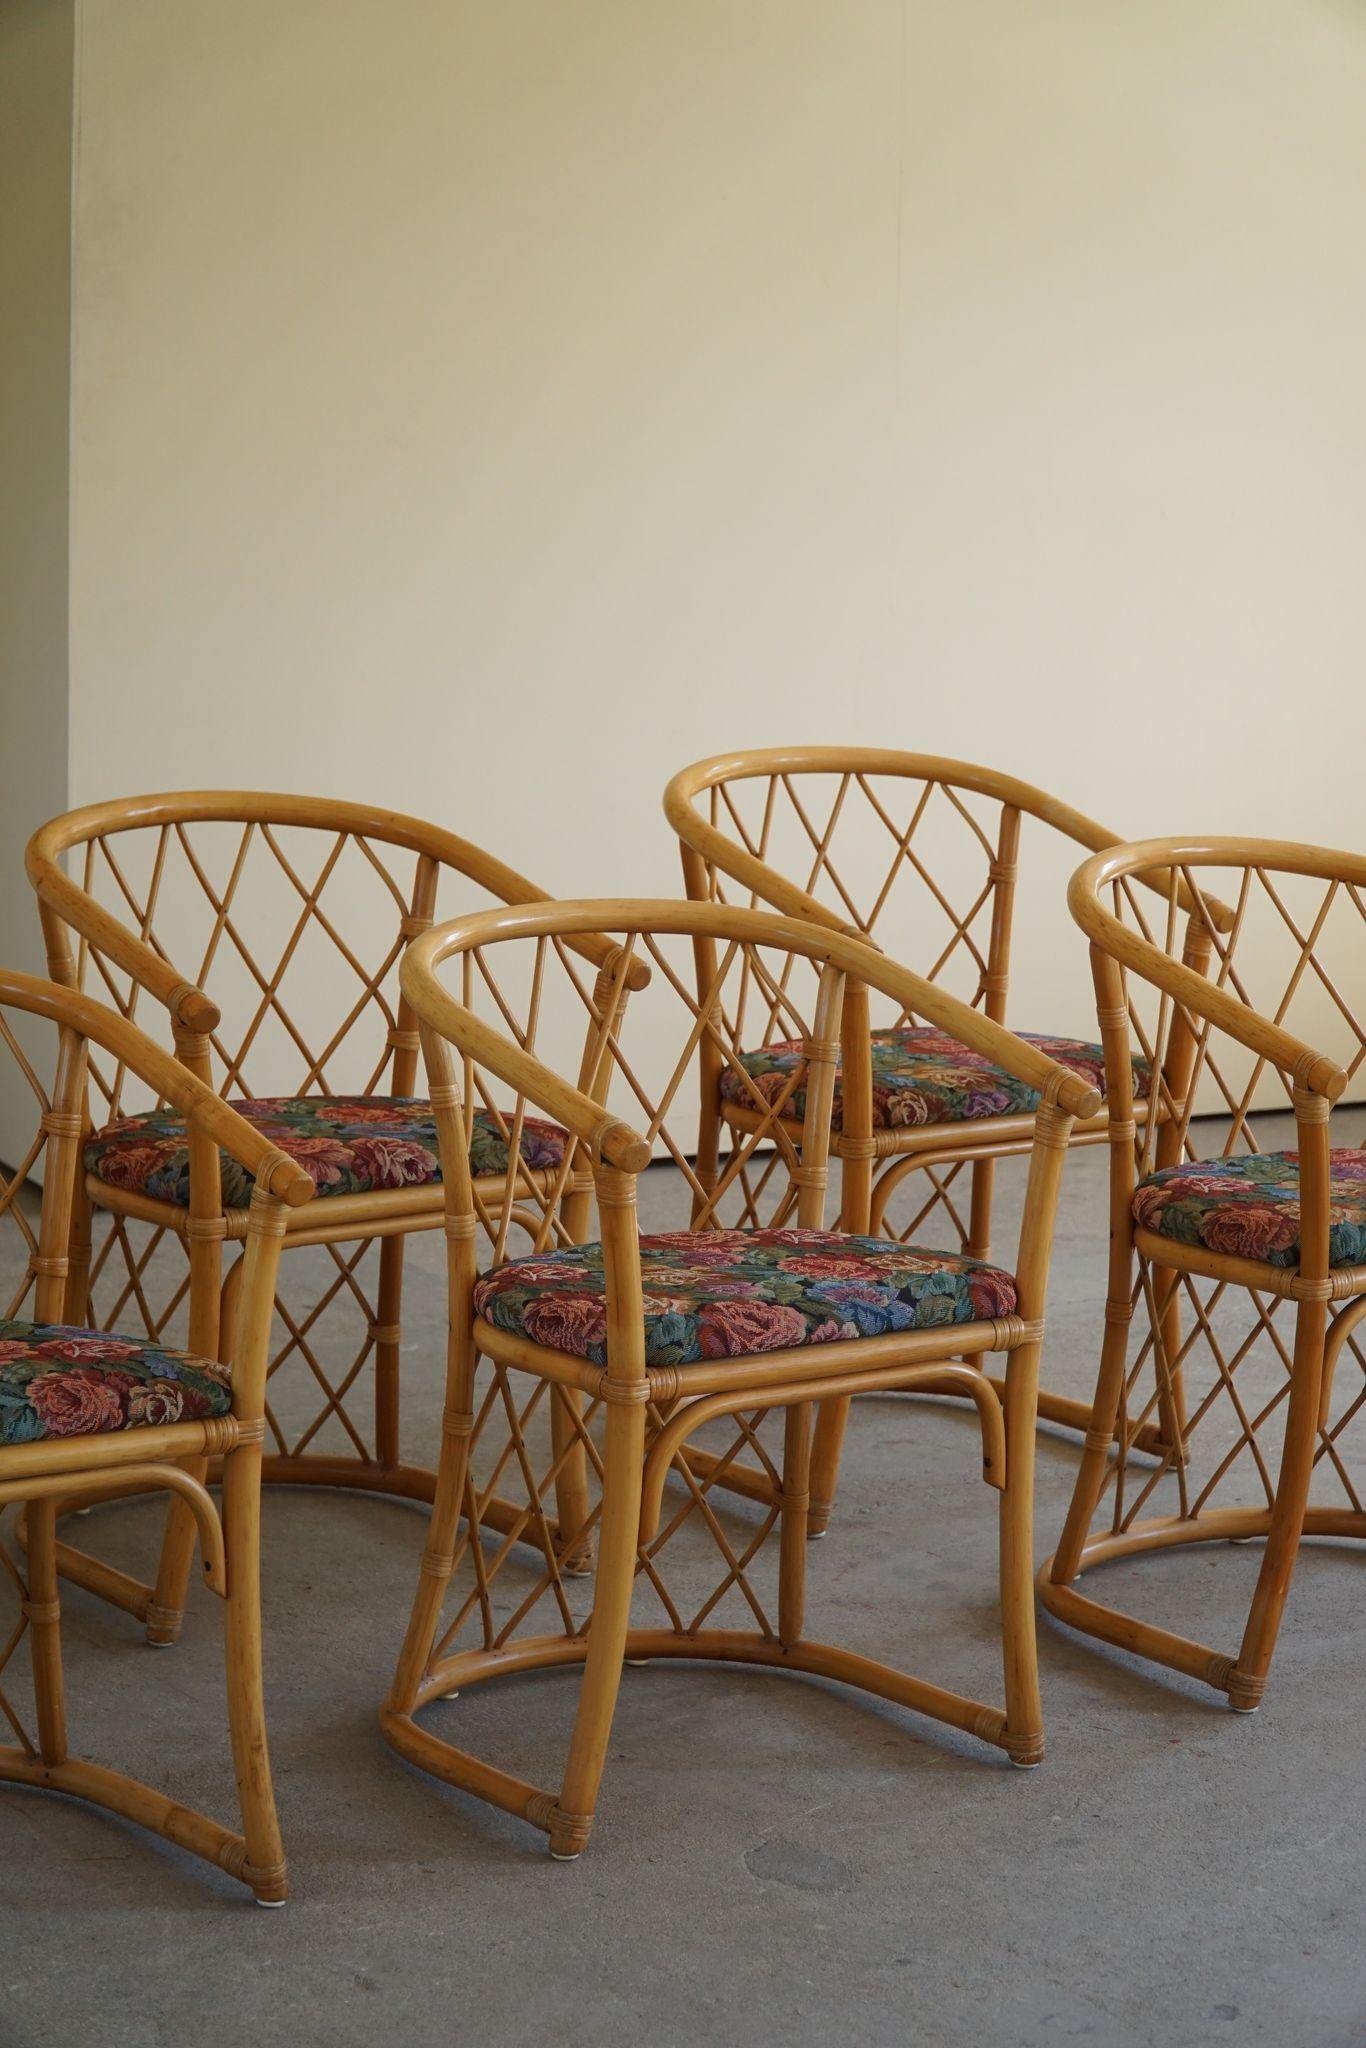 Set of 6 Sculptural Vintage Bamboo Dining Chairs, Danish Modern, Made in 1960s For Sale 3